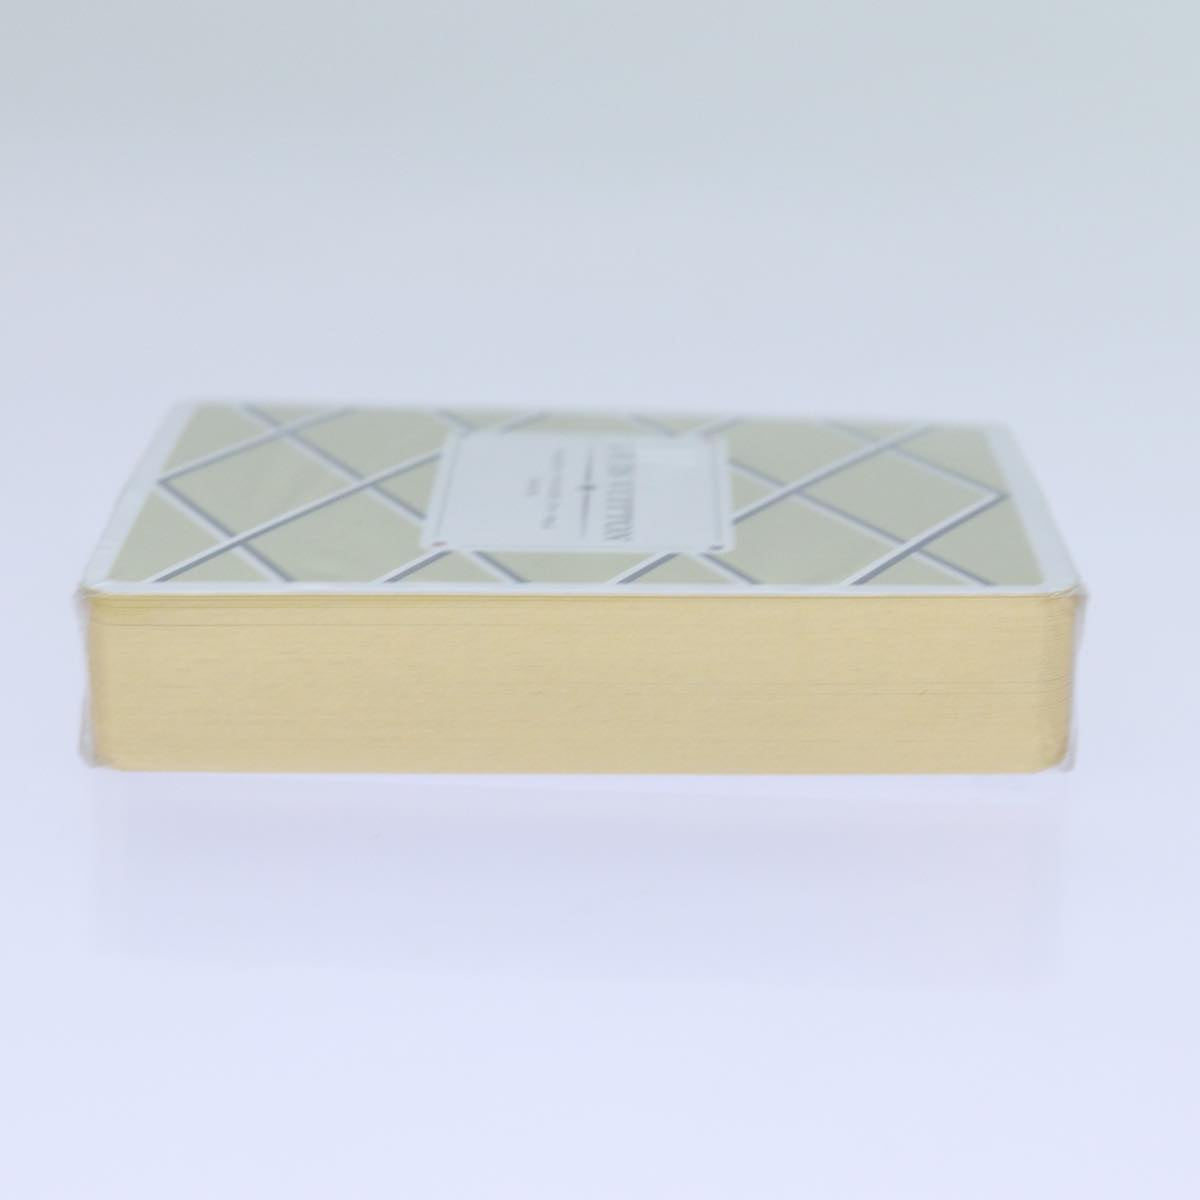 LOUIS VUITTON Playing Cards Beige LV Auth 70310